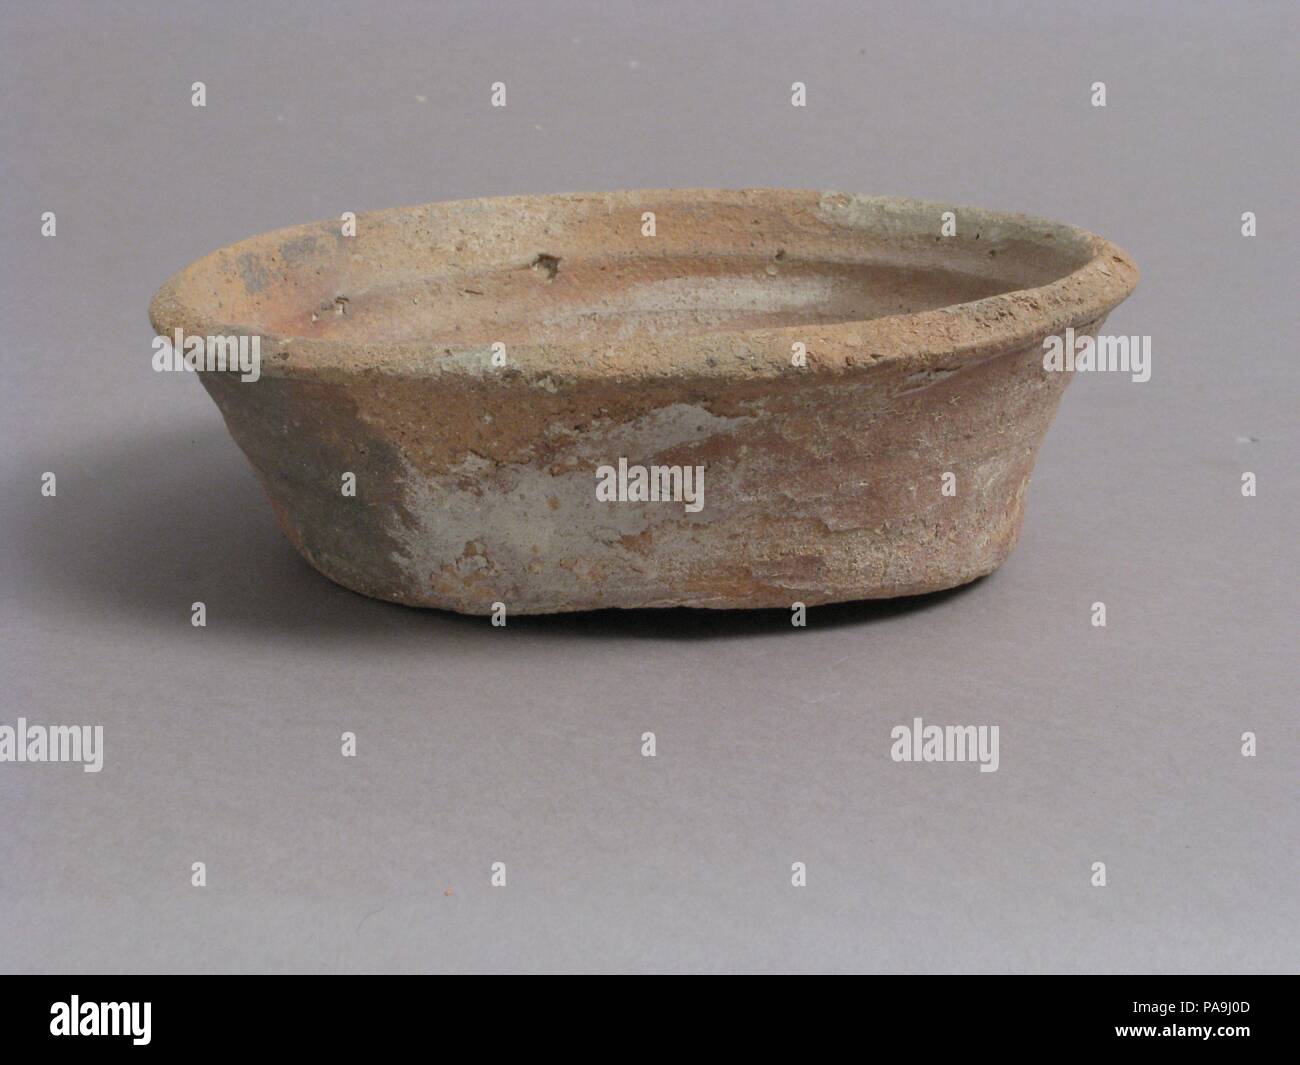 Bowl. Culture: Coptic. Dimensions: Overall: 1 7/8 x 5 7/8 in. (4.8 x 14.9 cm). Date: 4th-7th century. Museum: Metropolitan Museum of Art, New York, USA. Stock Photo